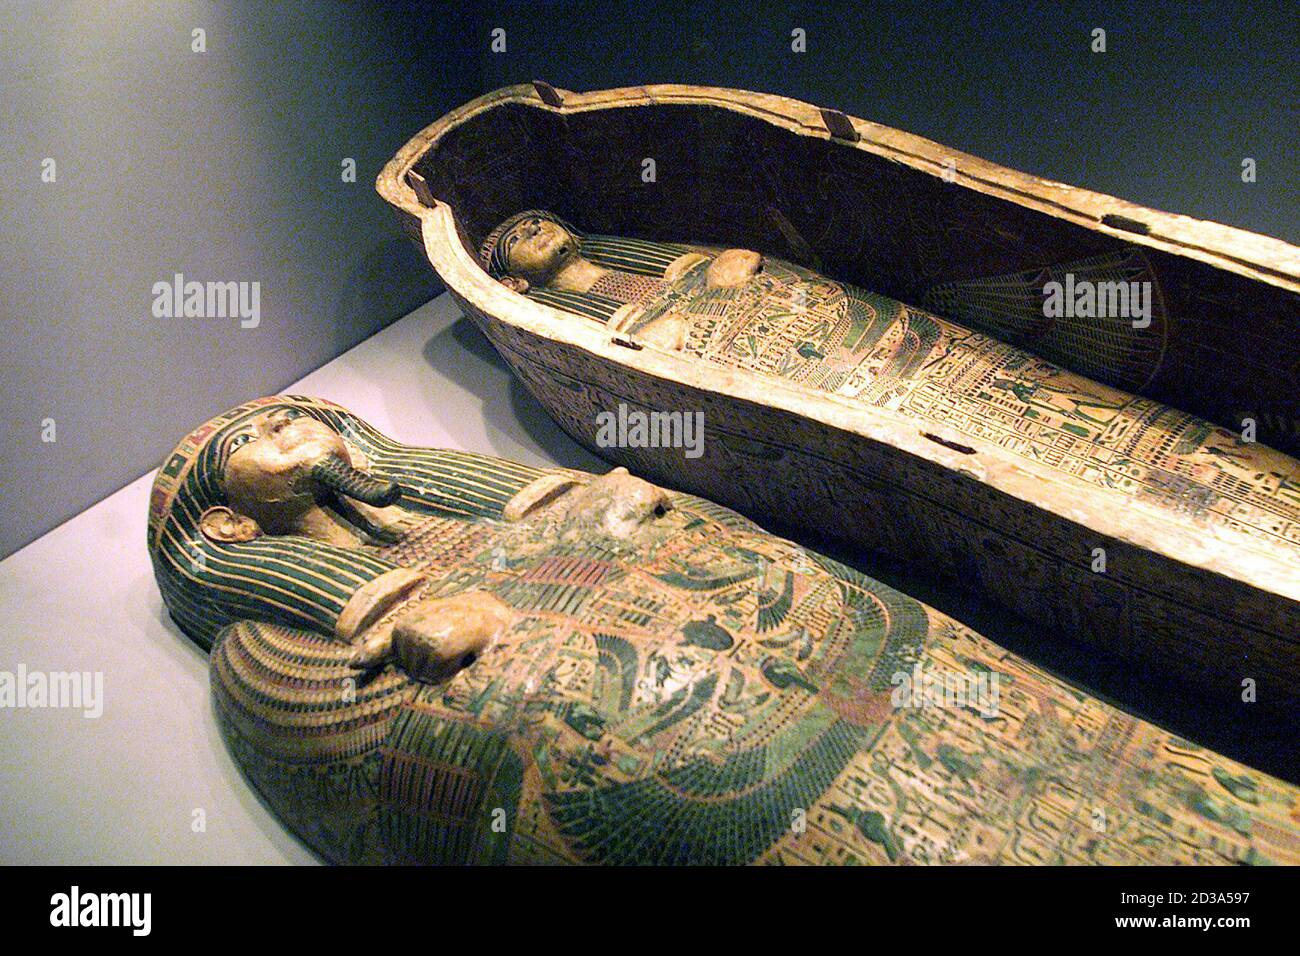 AN OPEN SARCOPHAGUS SHOWING A STATUE OF A MUMMY INSIDE, FOR THE ANCIENT BELIEF IN THE AFTER LIFE, ON DISPLAY IN A NEW GALLERY AT THE CAIRO MUSEUM. Stock Photo